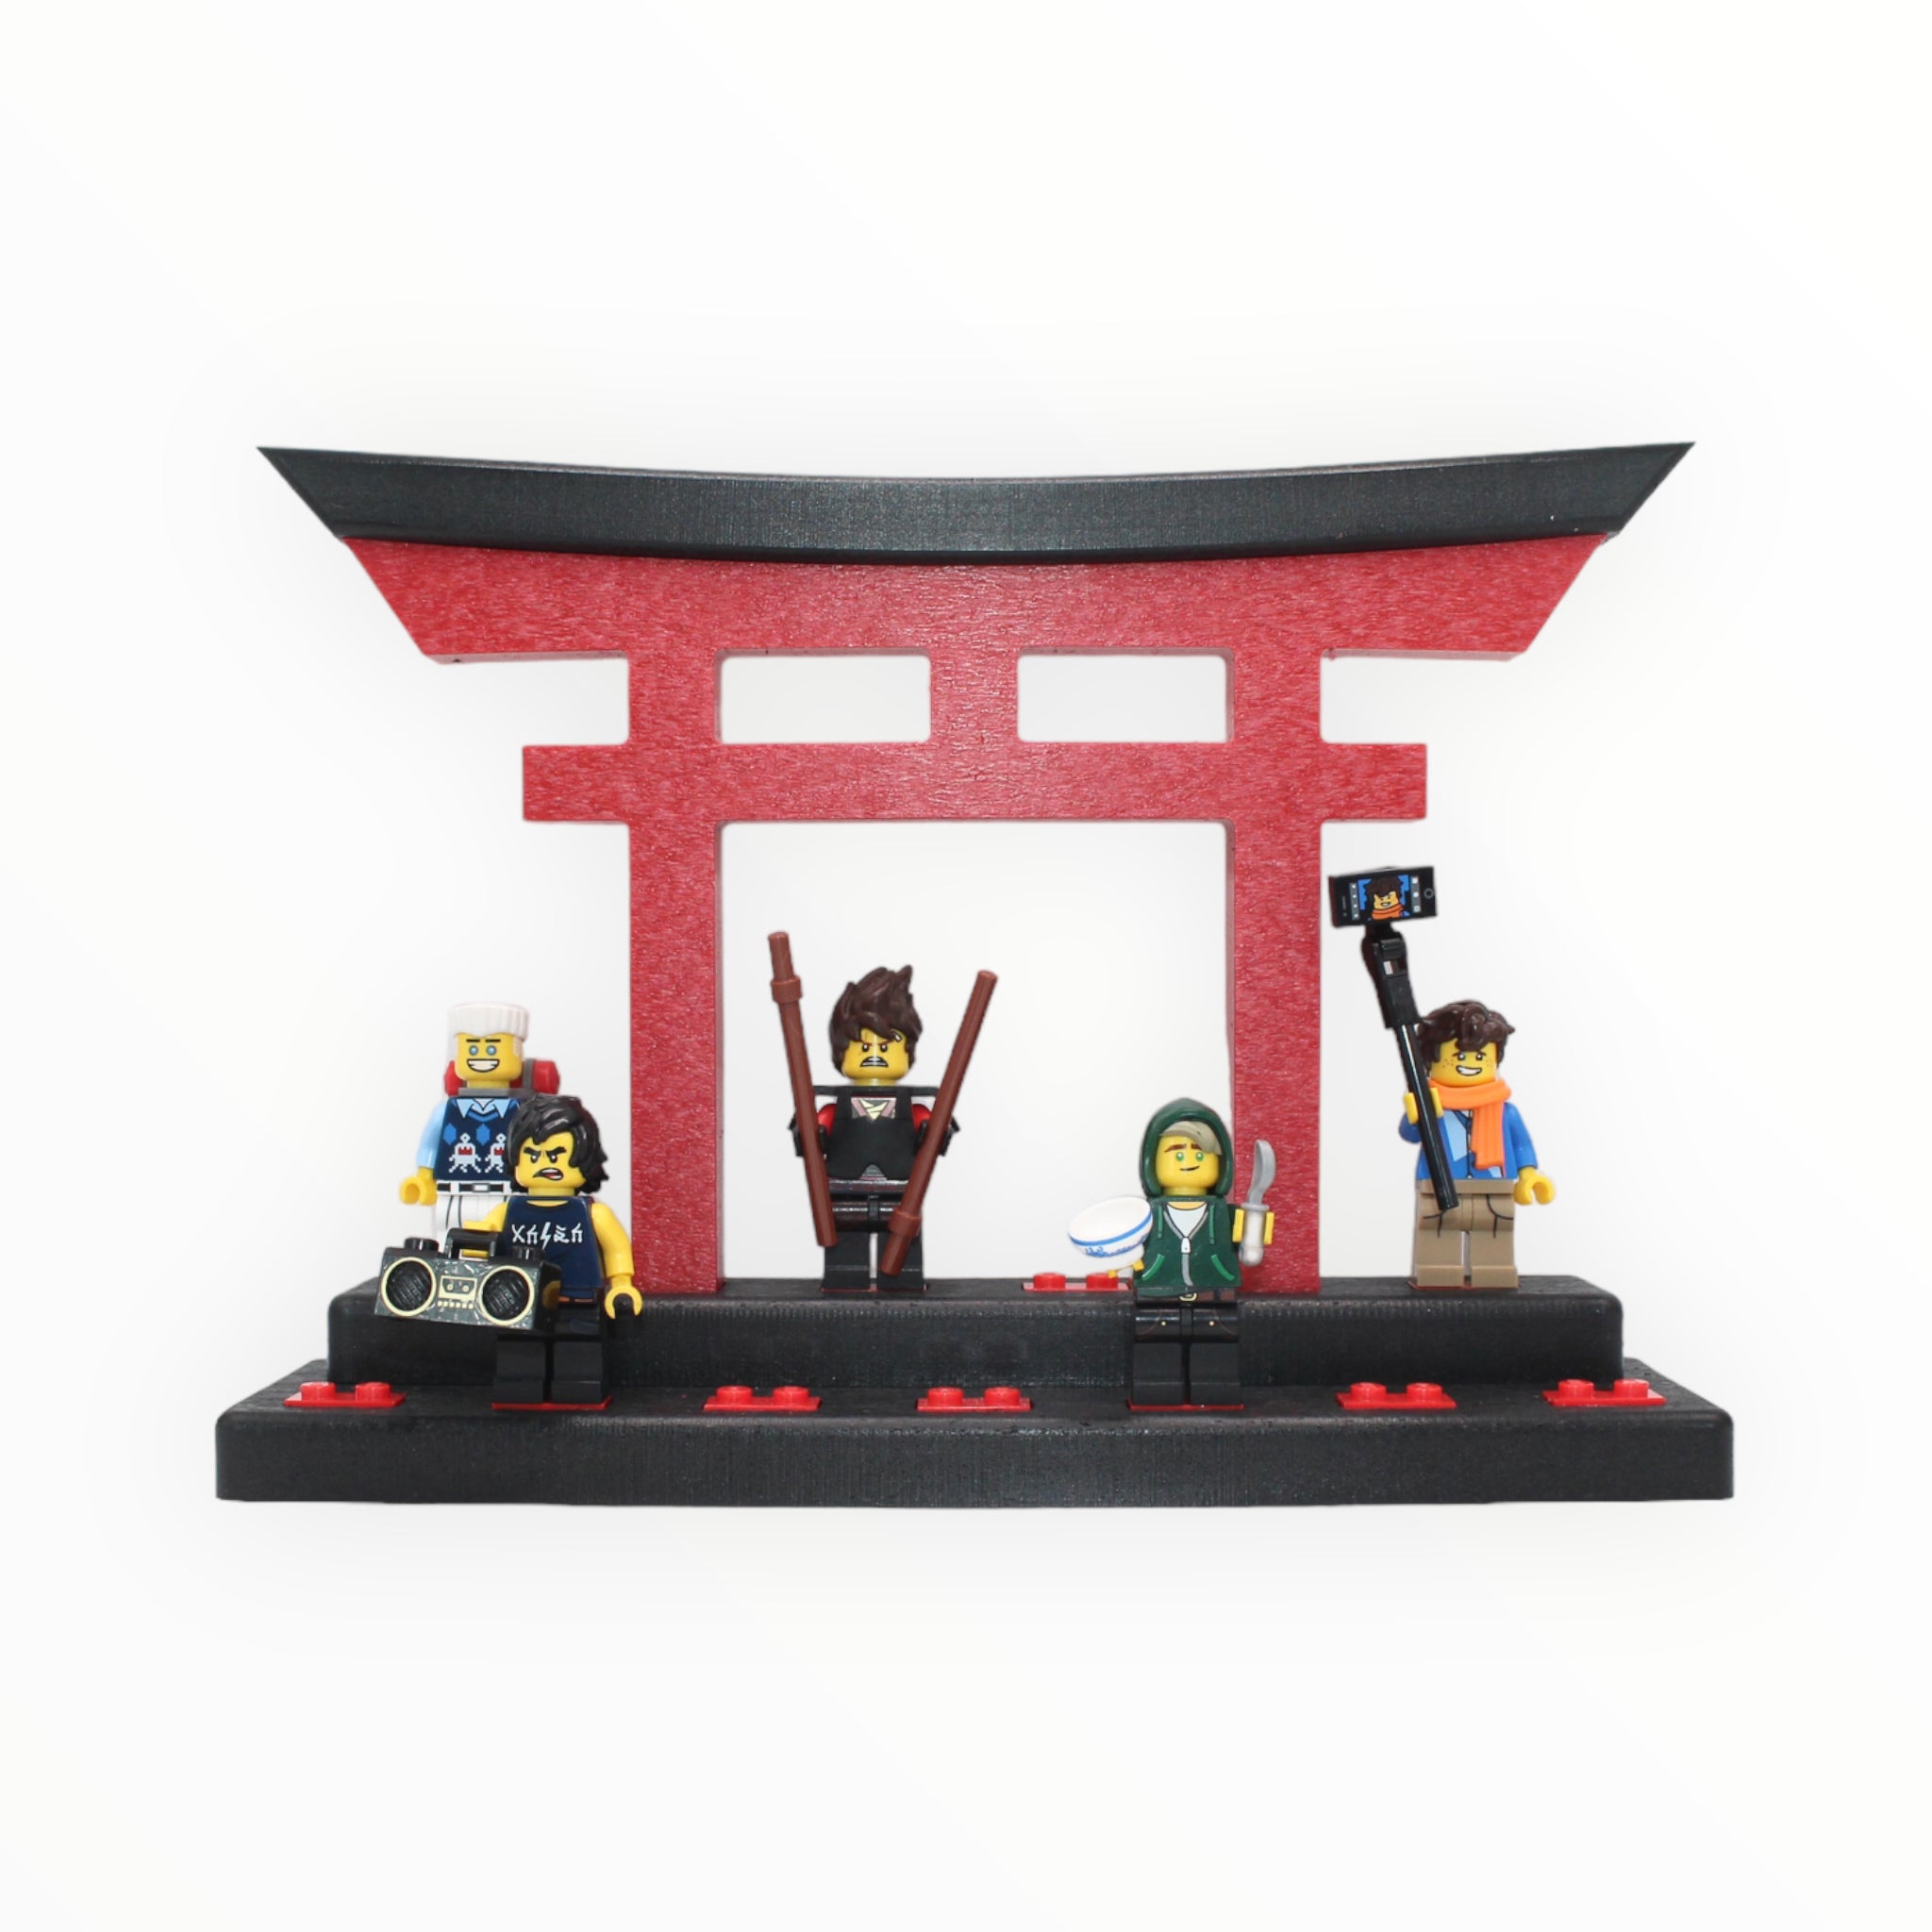 Temple Gate Minifigure Display Stand (black and red)